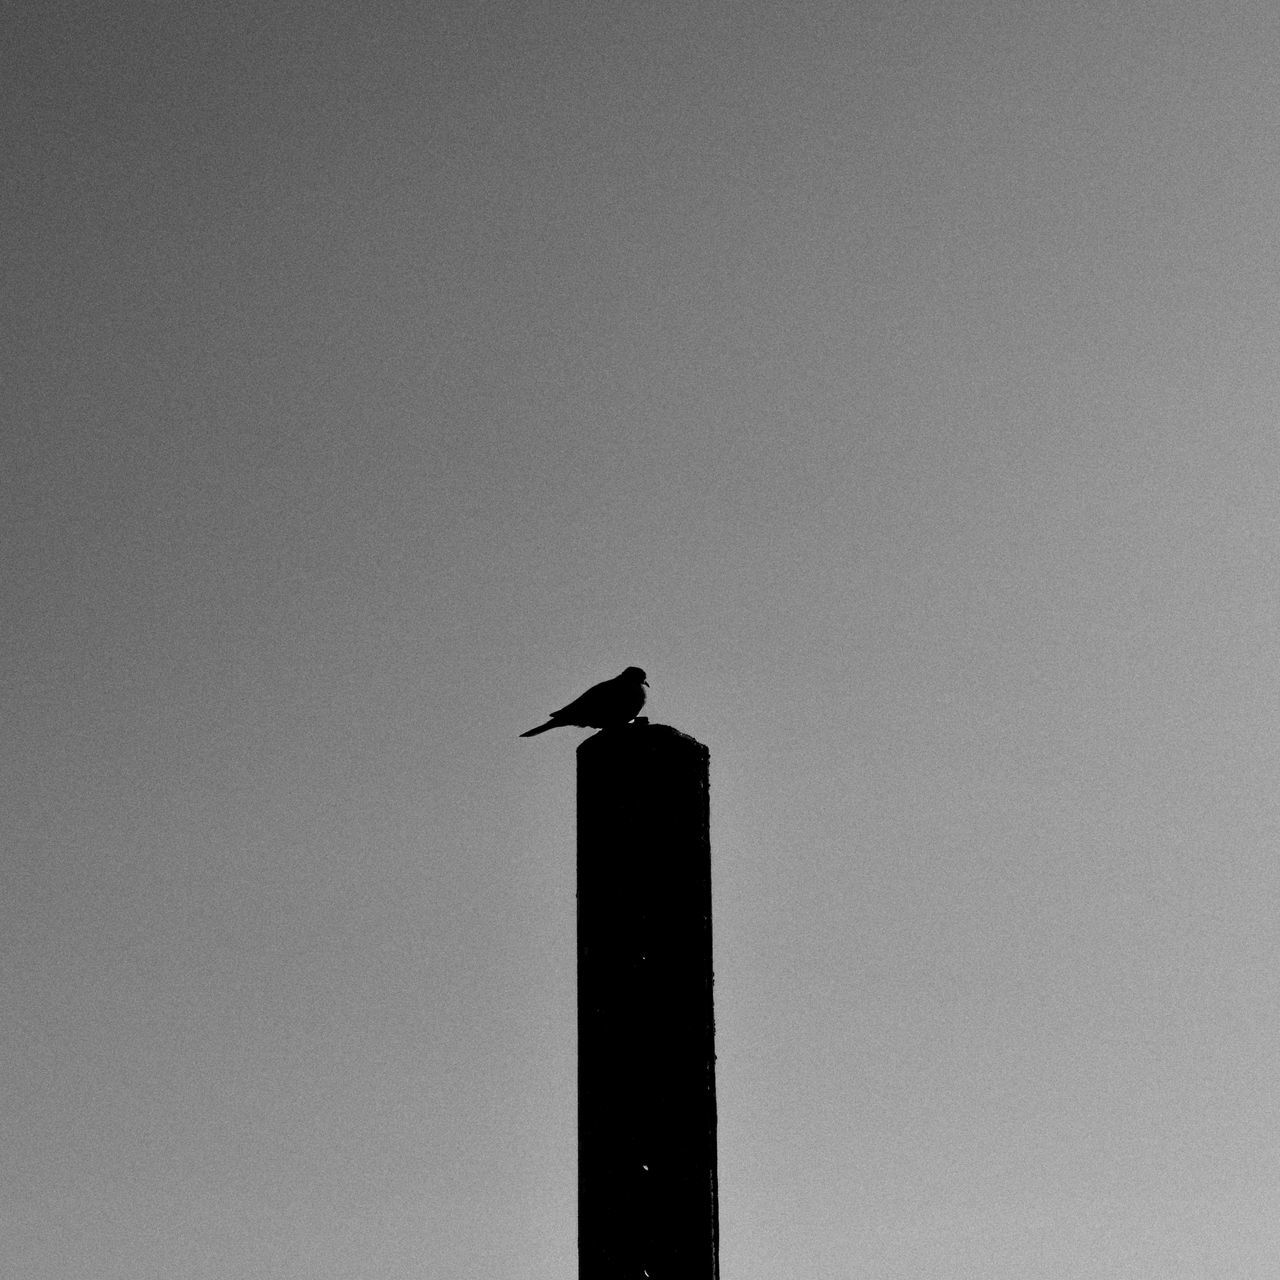 bird, animals in the wild, animal wildlife, vertebrate, animal, animal themes, one animal, perching, copy space, sky, low angle view, clear sky, no people, silhouette, nature, outdoors, day, crow, architecture, built structure